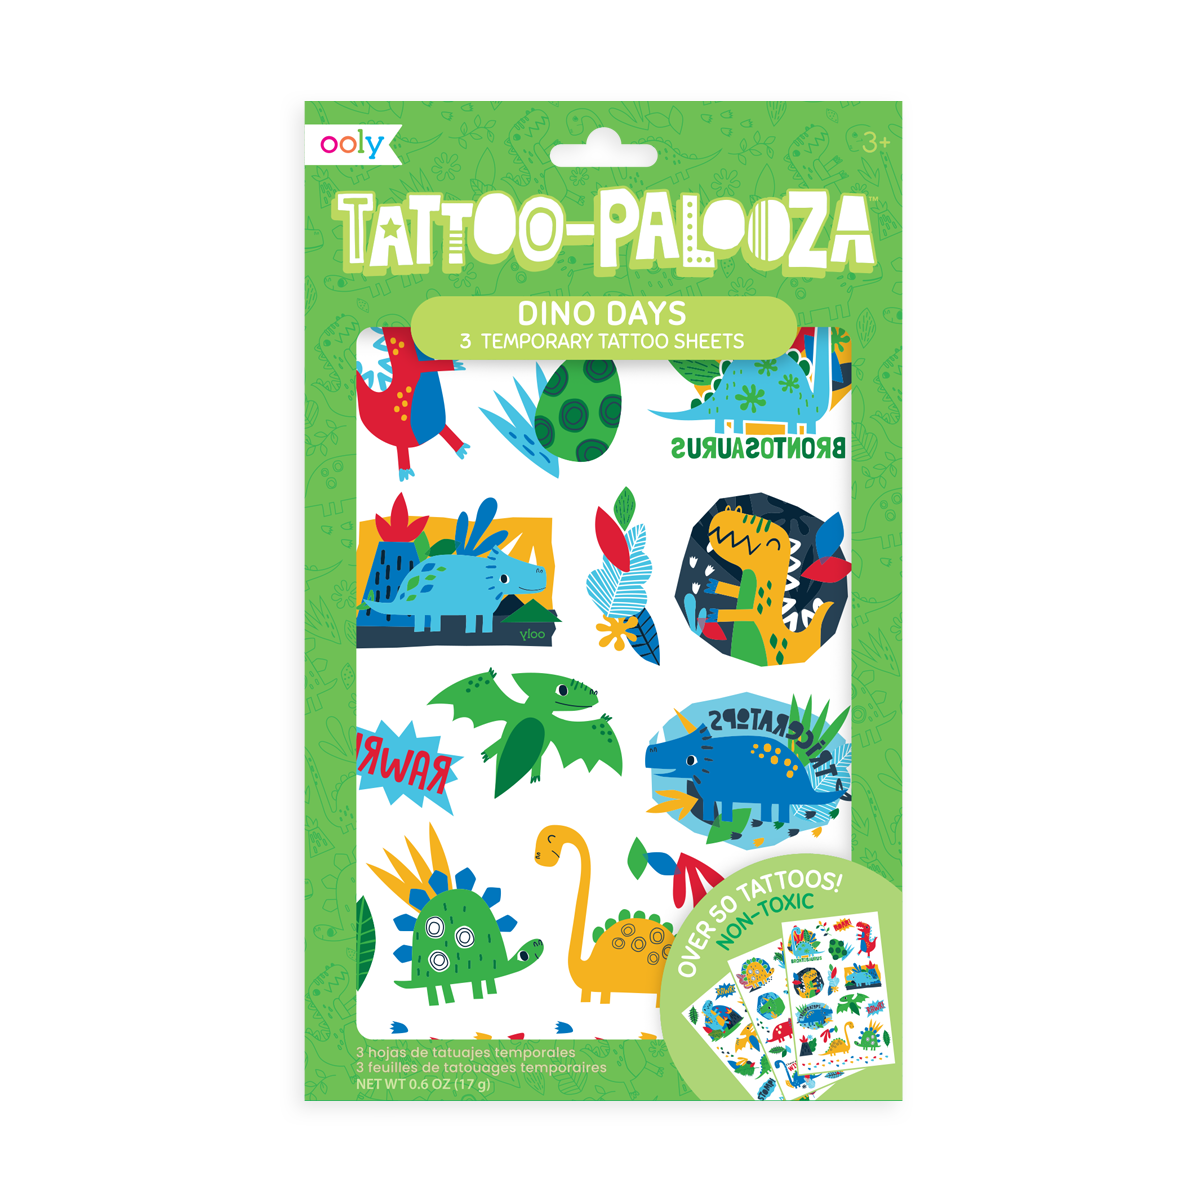 Tattoo-Palooza Temporary Tattoos - Funtastic Friends in product packaging